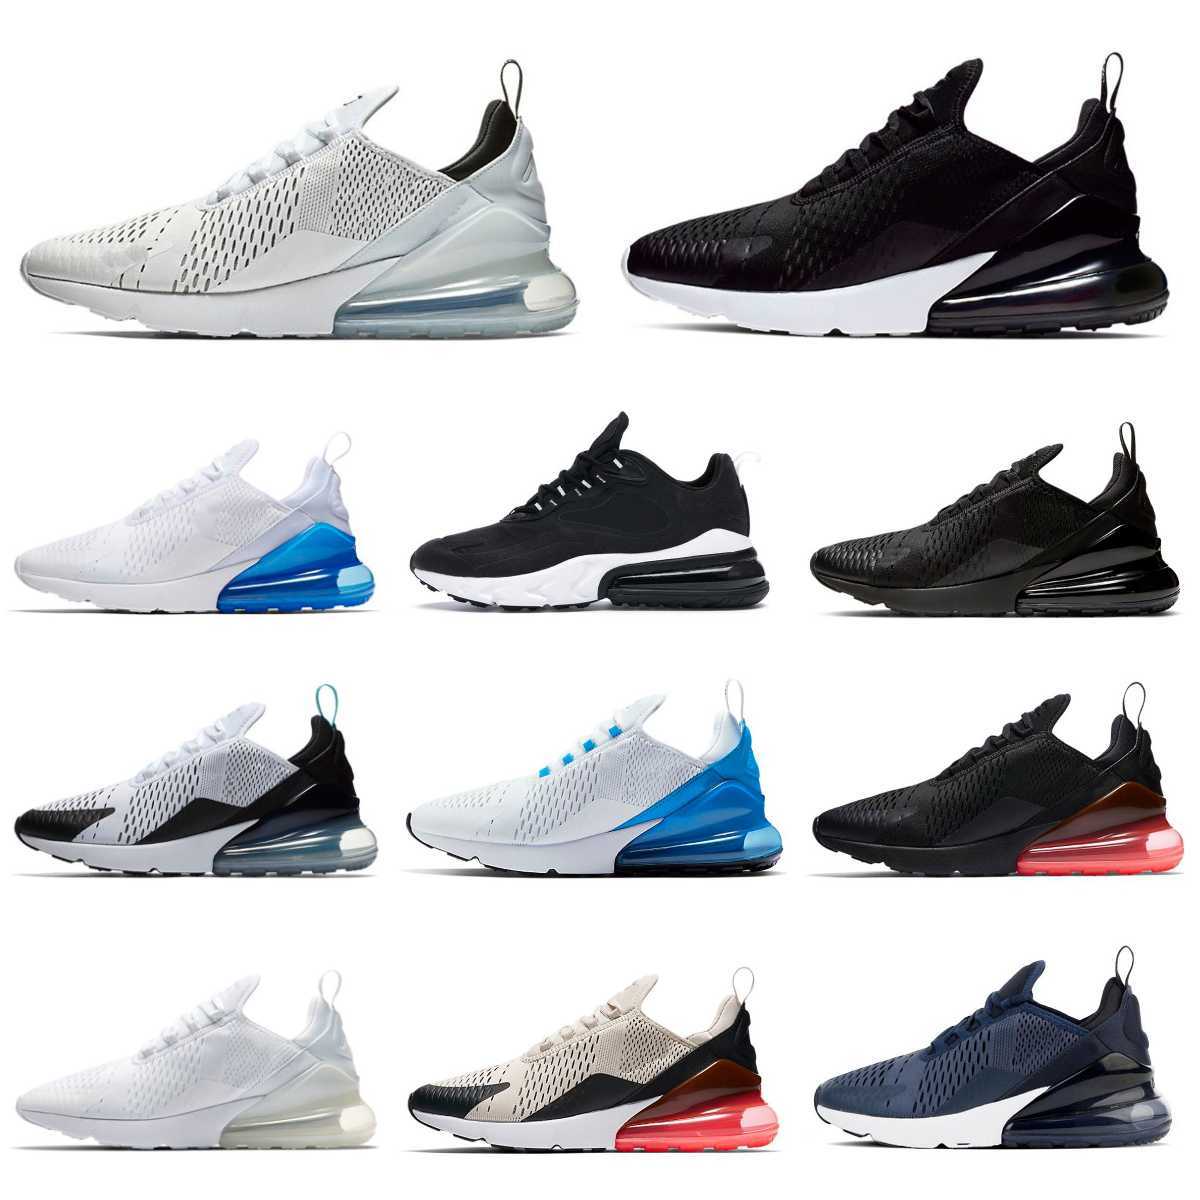 

Designers Max 270 270s Men Women Running Shoes AirMaXs Triple Black White Dusty Cactus Multi University Red Brown Barely Rose Anthracite Trainers Sports Sneakers S8, Please contact us